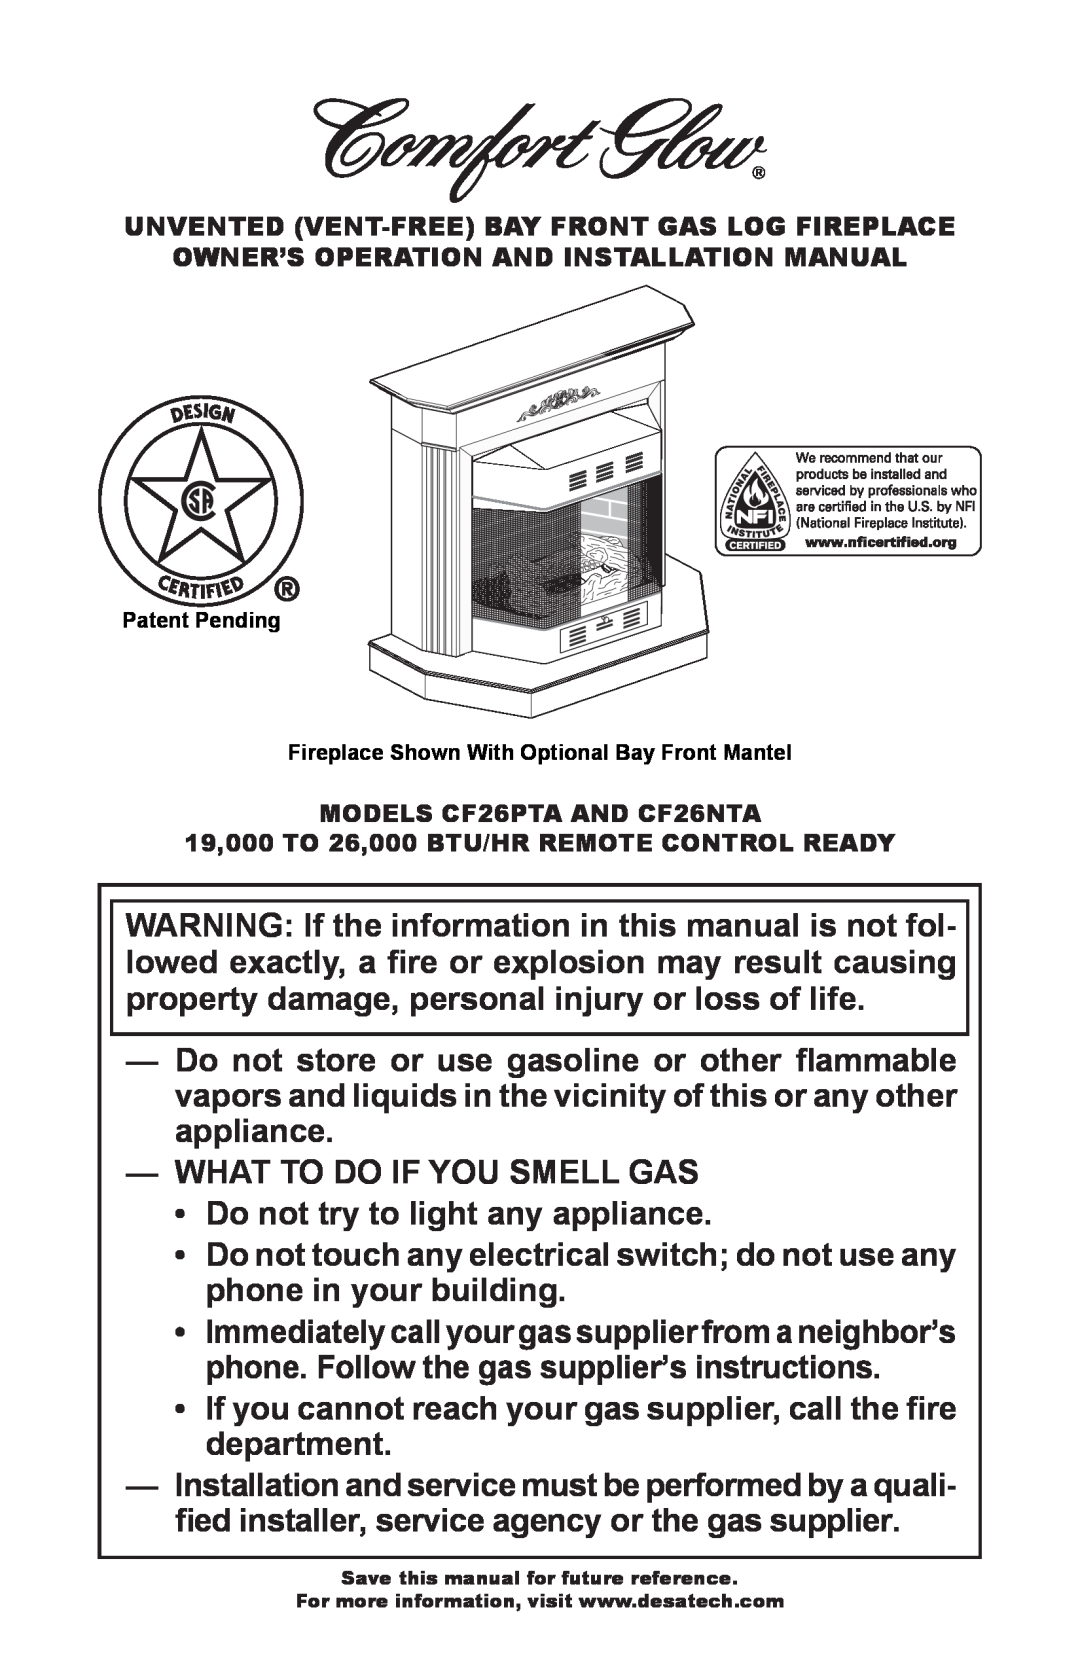 Desa CF26NTA installation manual What To Do If You Smell Gas 